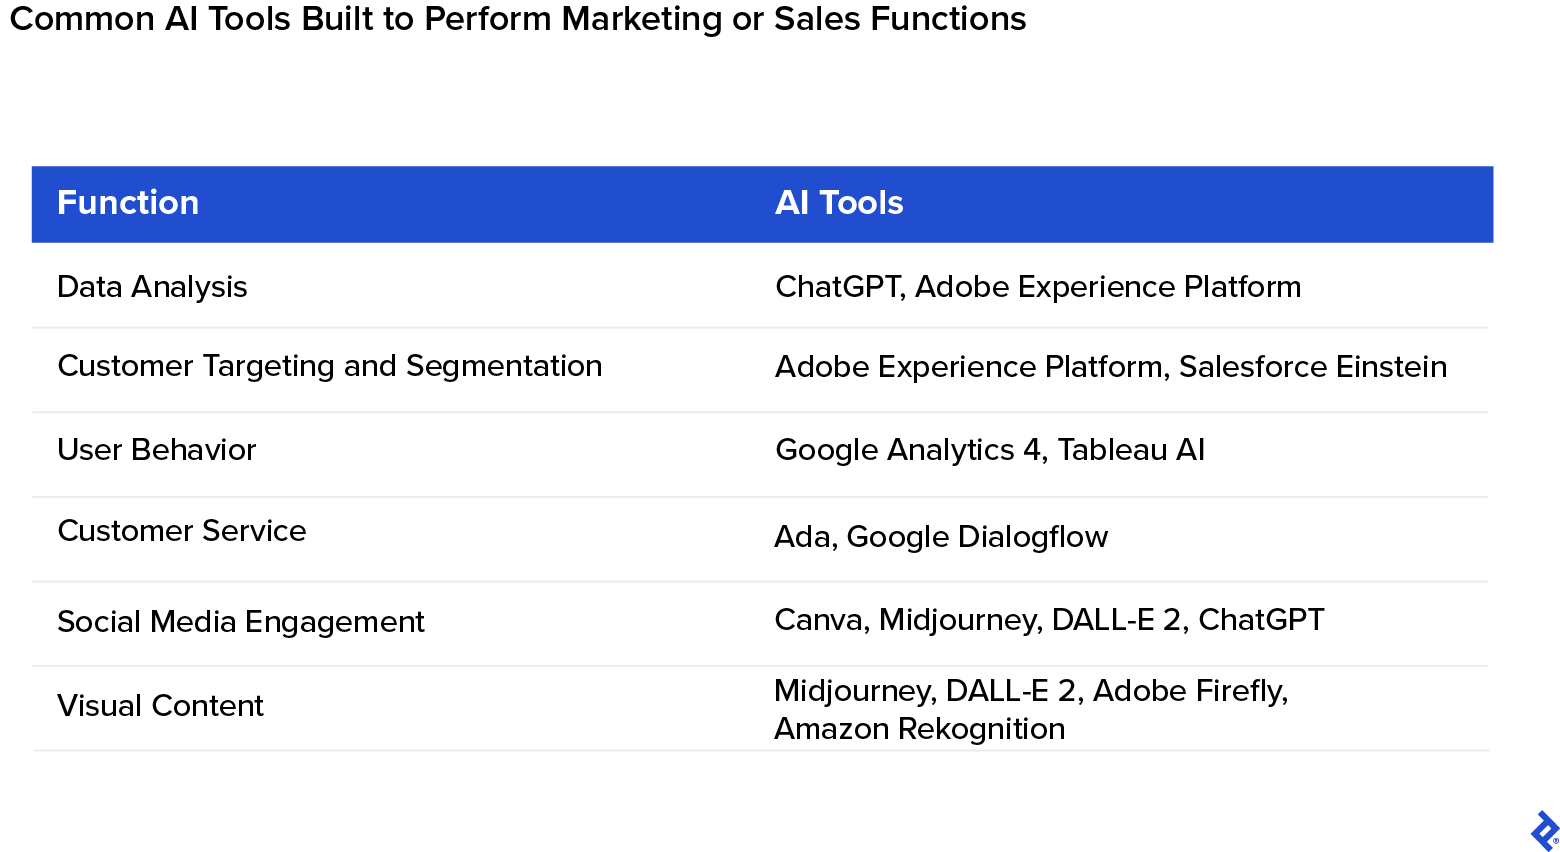 Several AI tools can be used to perform various marketing or sales functions, including ChatGPT, Adobe Experience, and Midjourney.